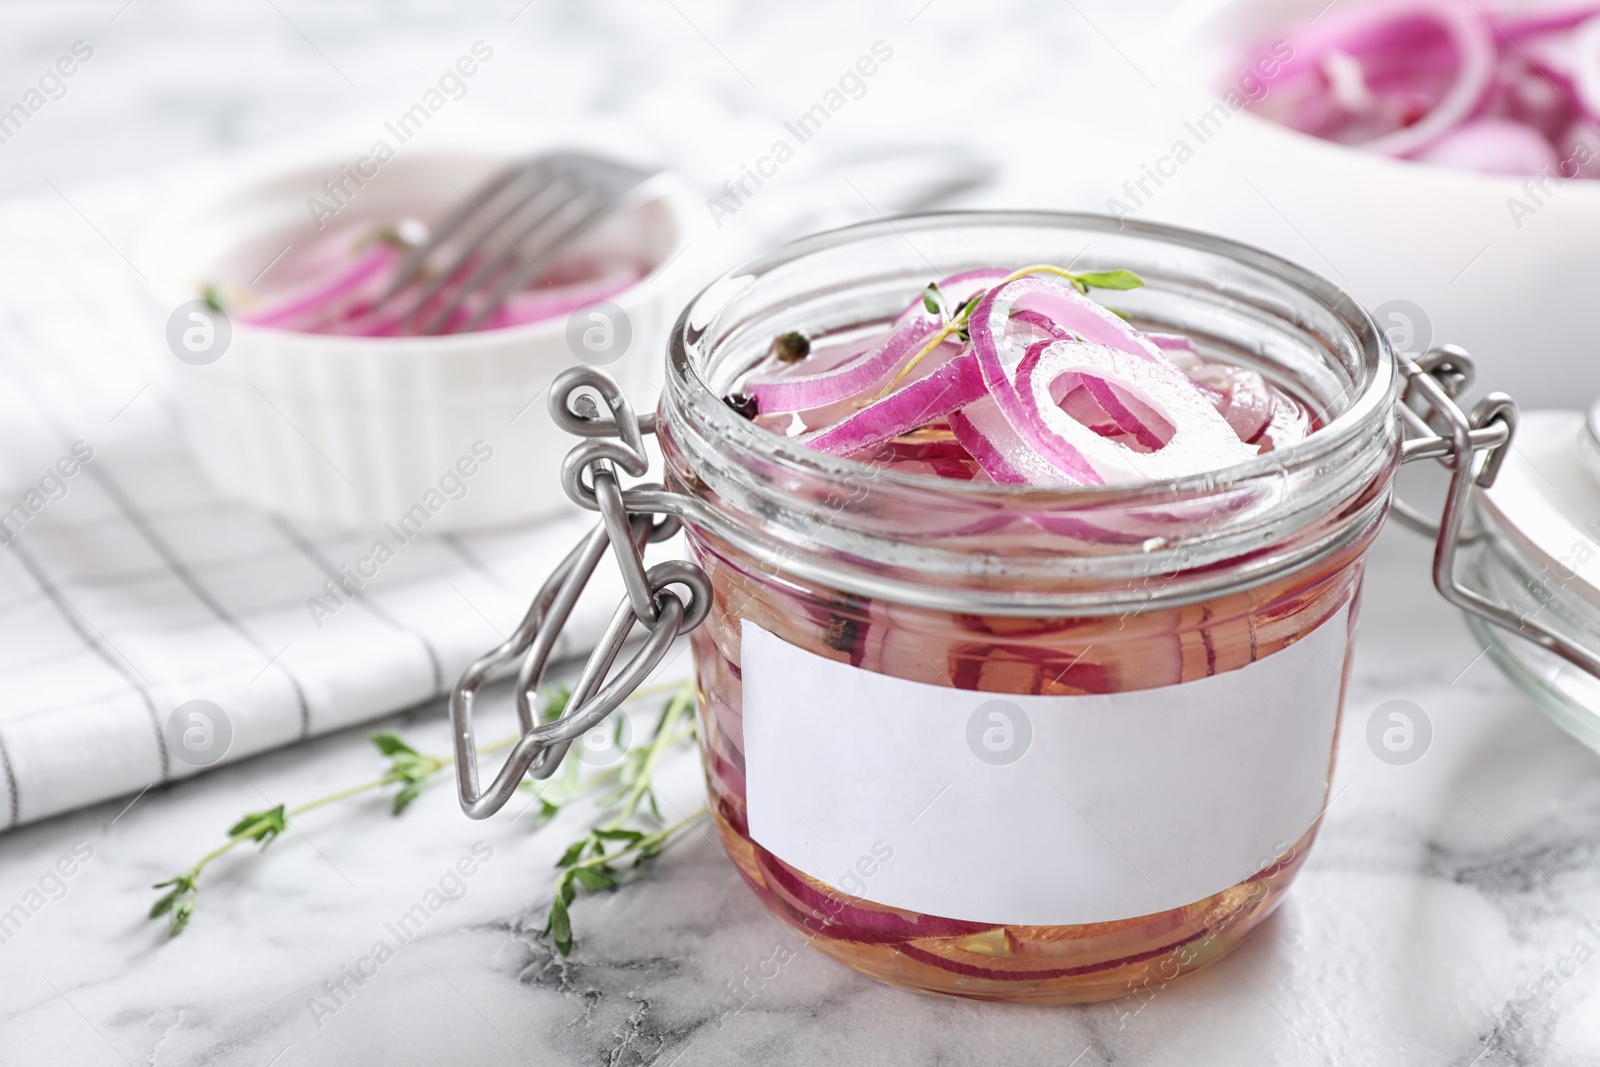 Photo of Jar of pickled onions with blank label on marble table